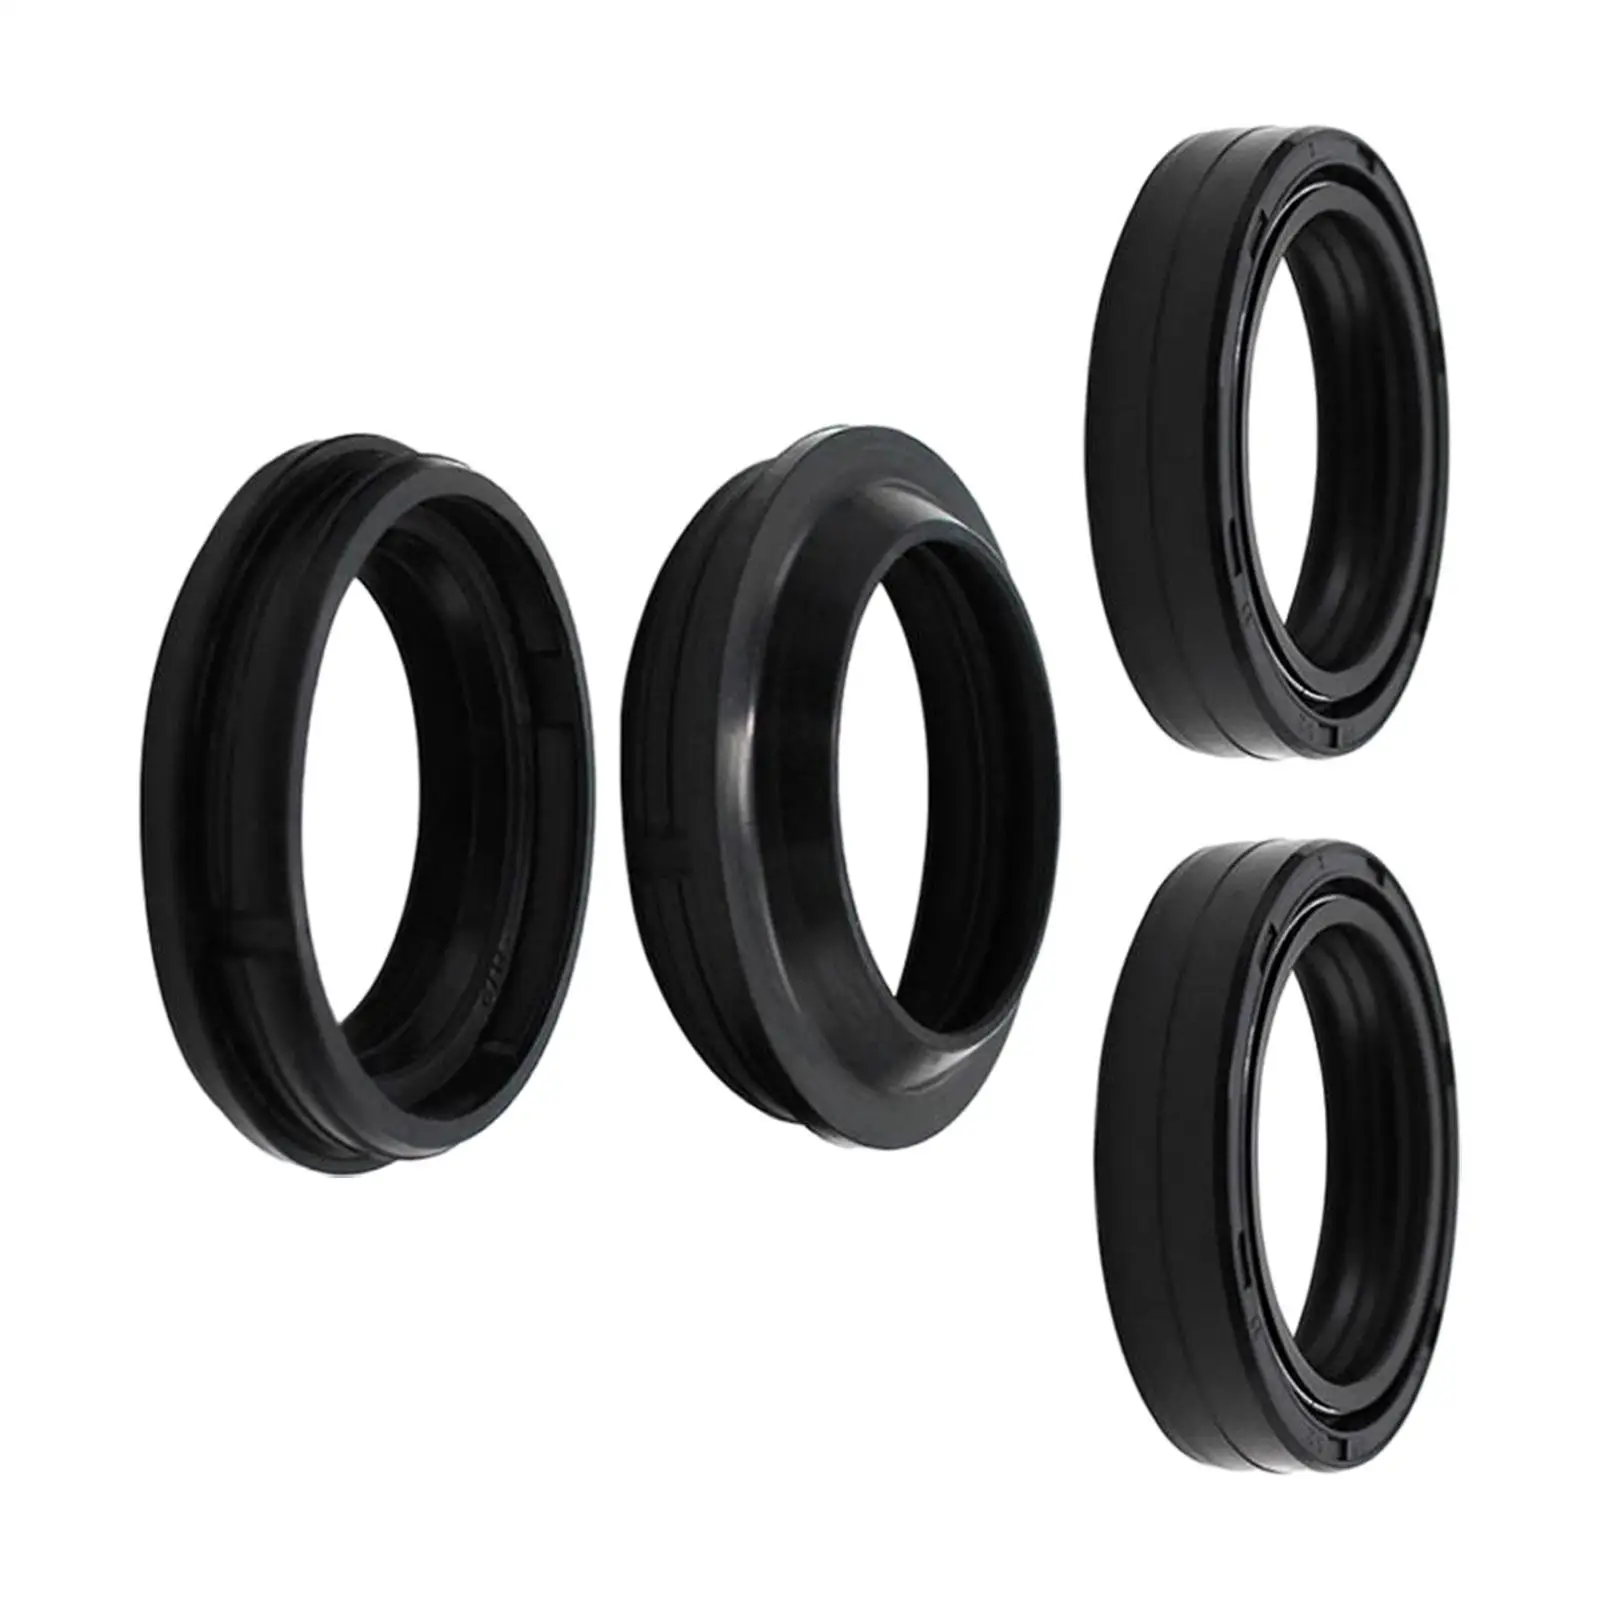 4x Motorcycle Front Fork Damper Oil Seal and Dust Seal Durable 36x48x11mm for Yamaha XT 125 R Bra 2007 XT 125 x 2005-2008